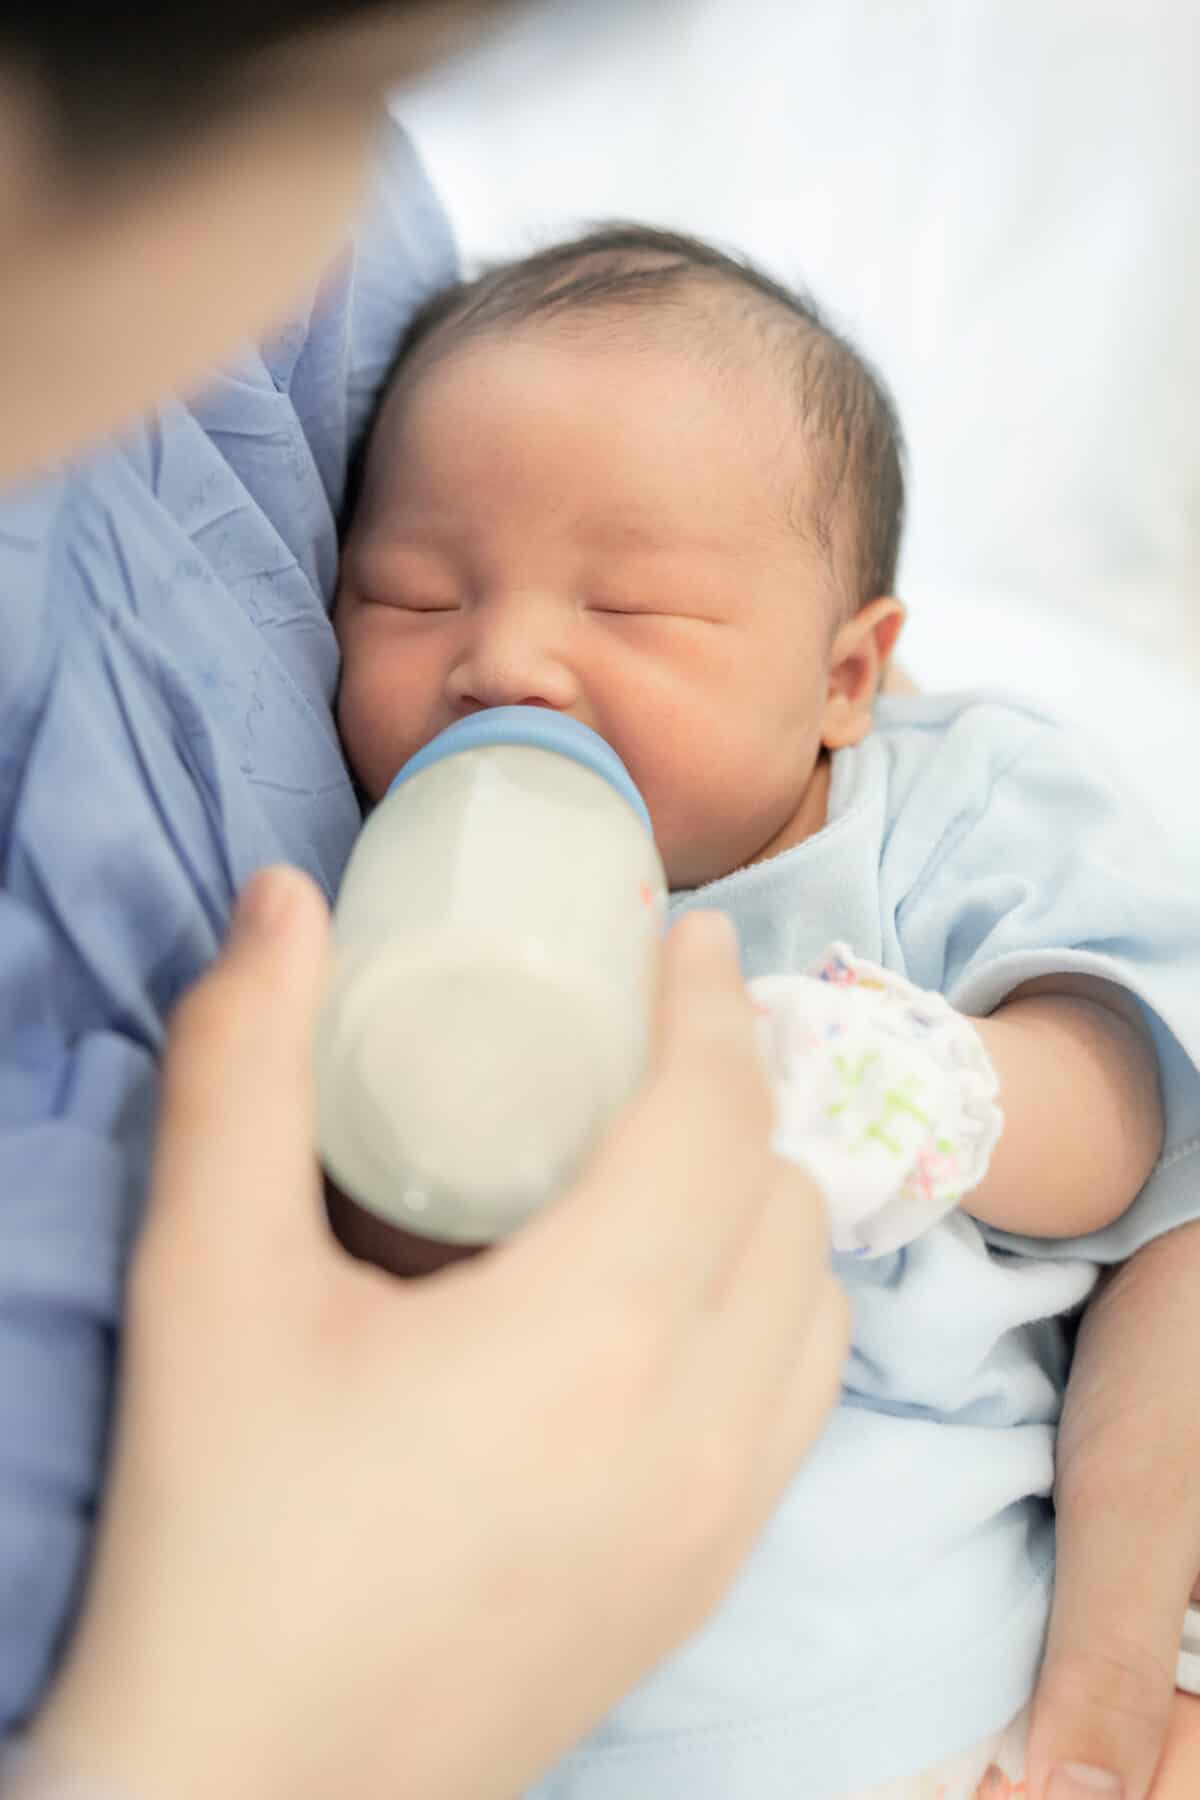 A newborn baby little boy who sleeps the first days of life in a hospital drinking milk from a bottle in the mom's arms.